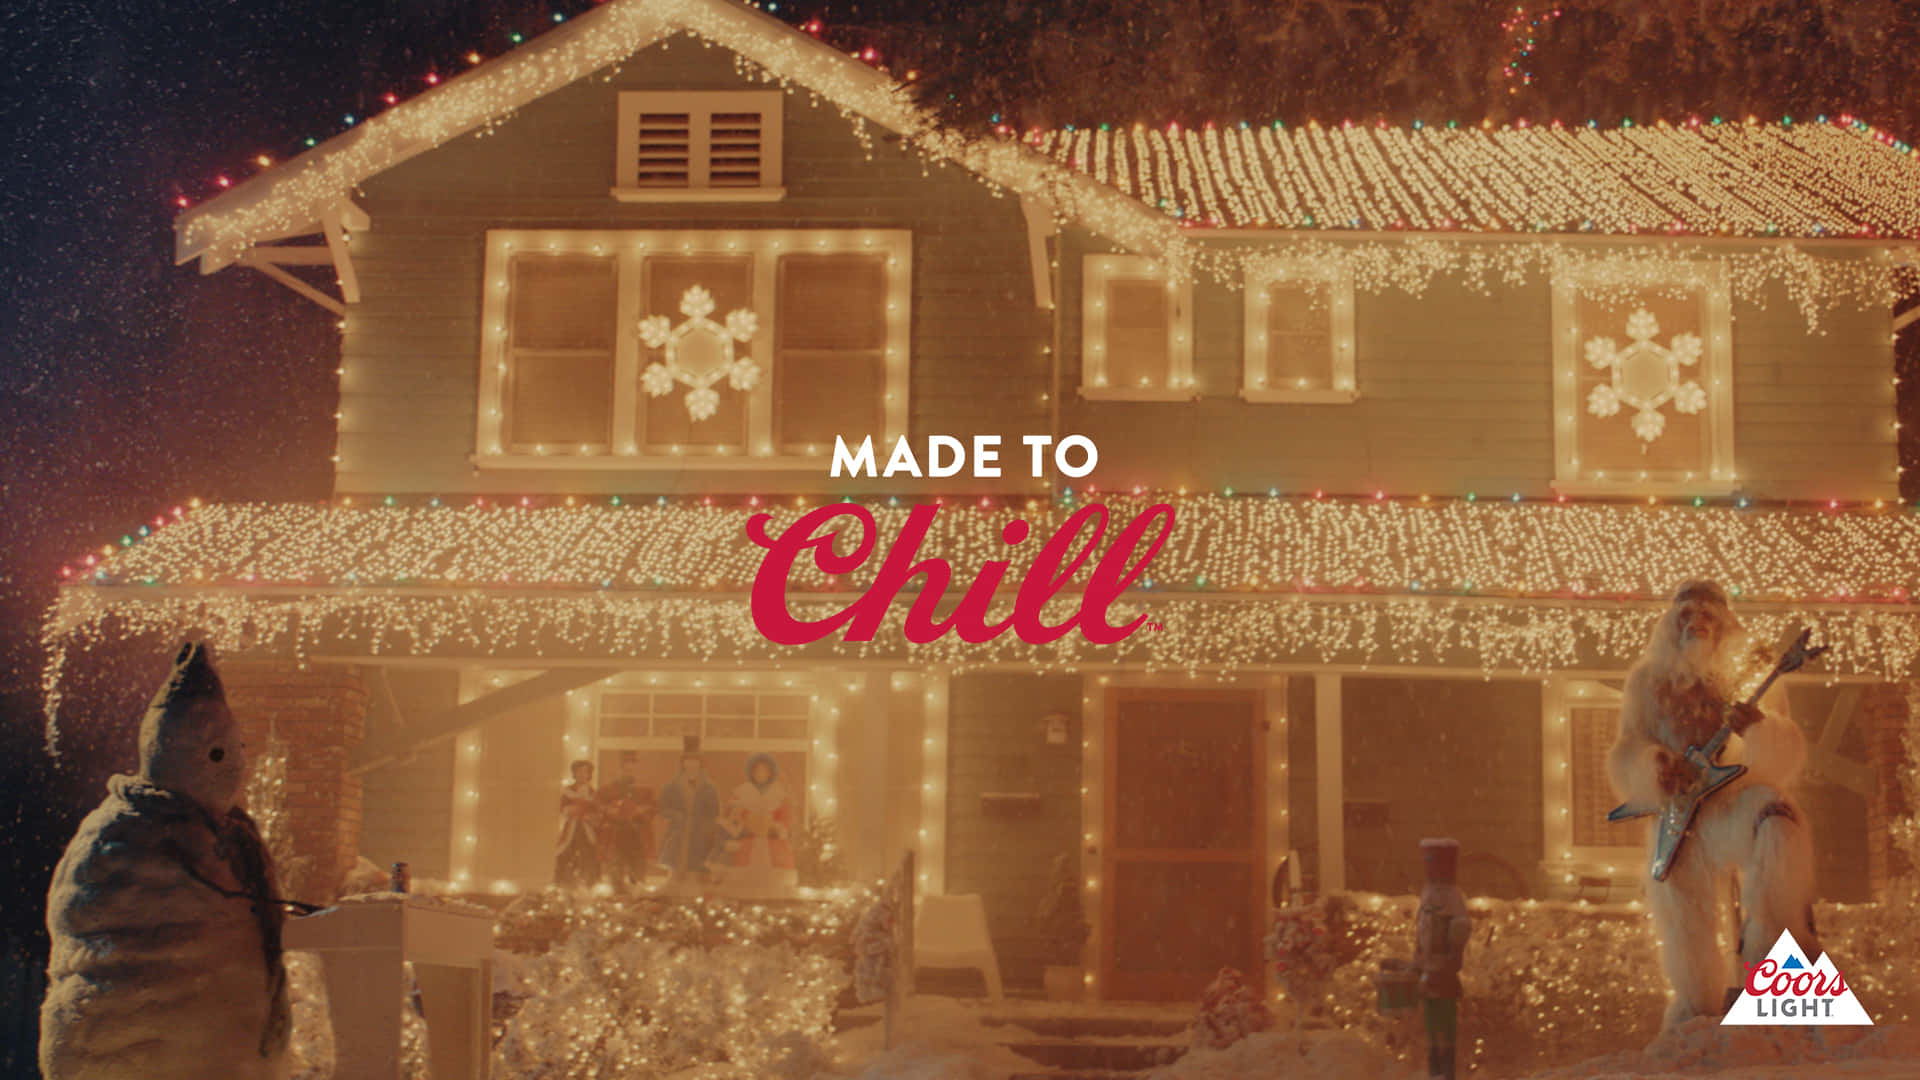 Coors Light Made To Chill Commercial Ad Wallpaper